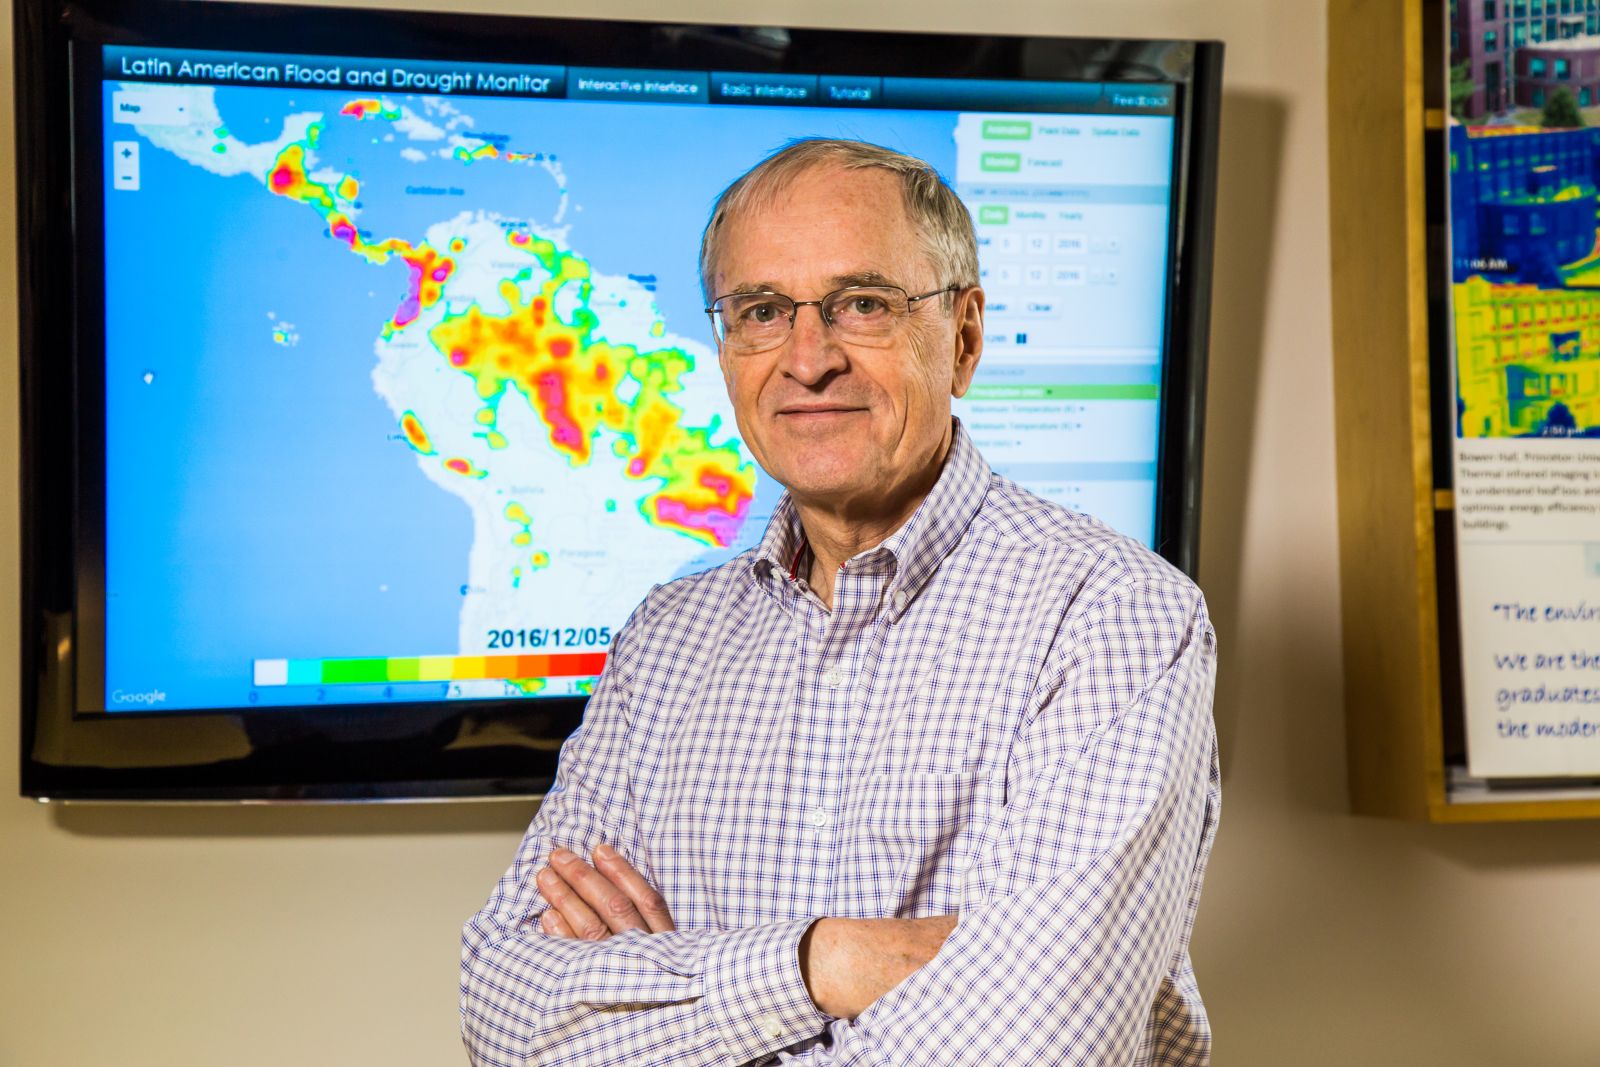 Eric Wood, standing, hands crossed, in front of a colorful computer-generated map of South America